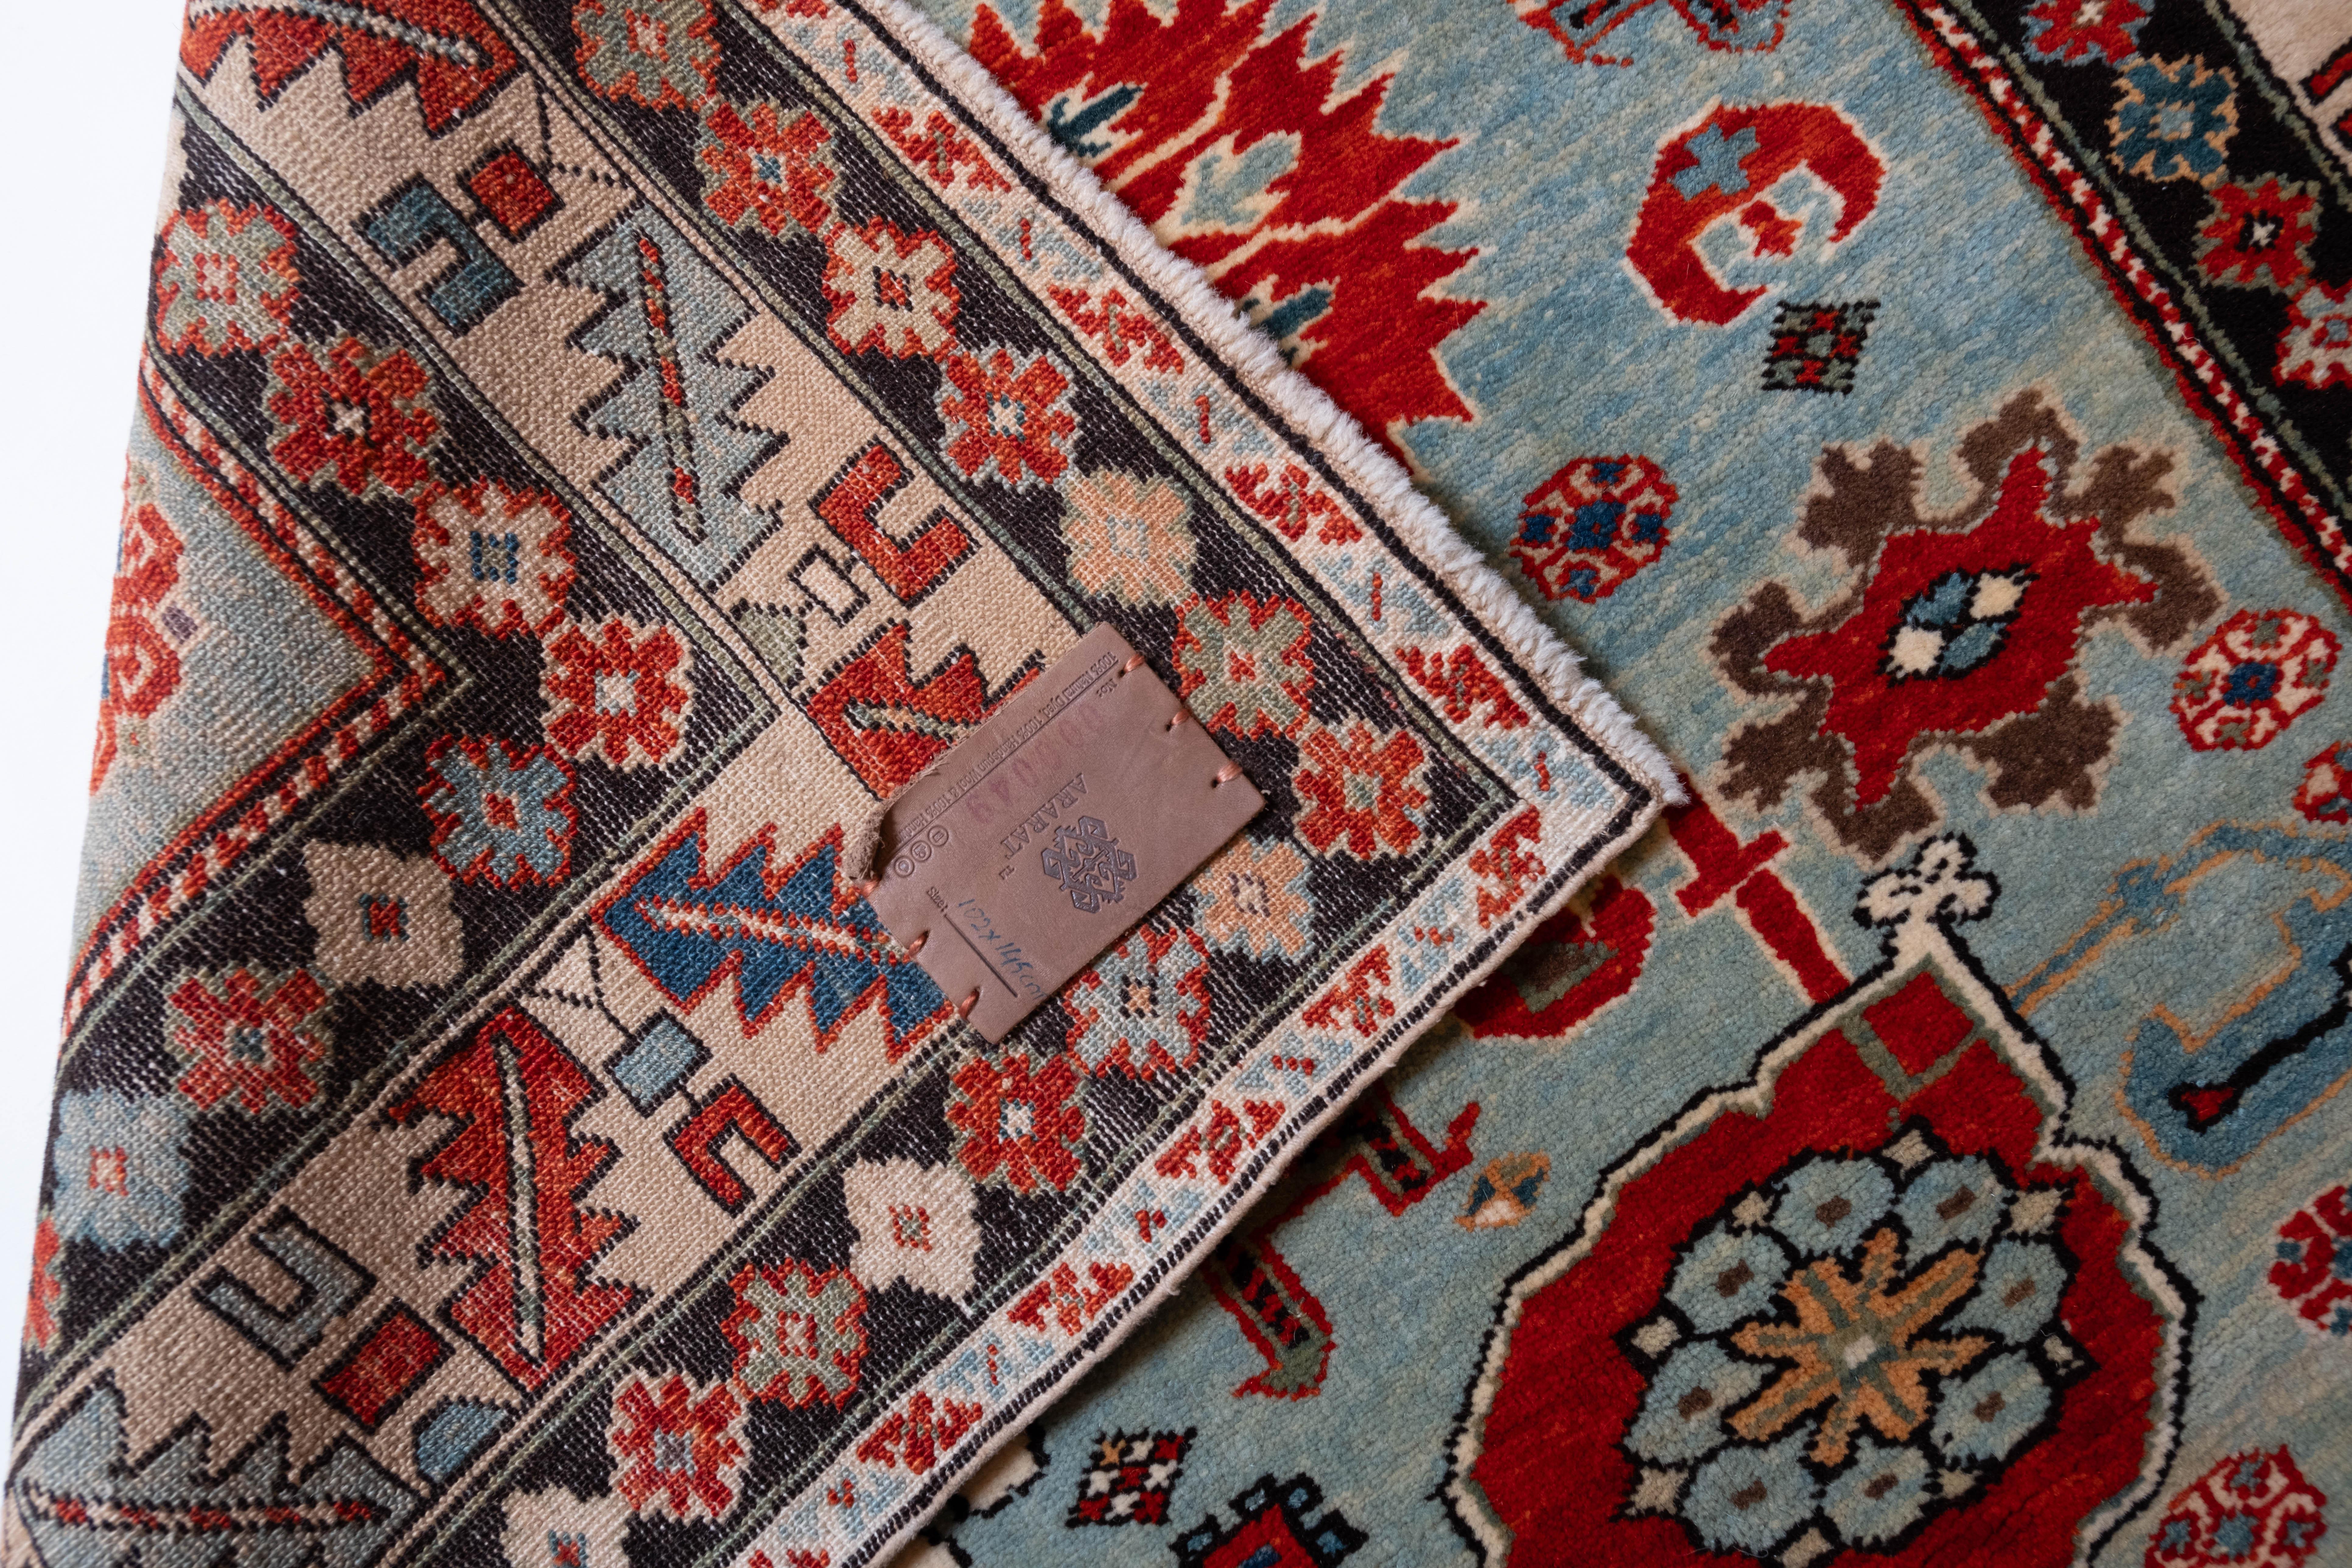 Turkish Ararat Rugs Kuba Rug with Palmettes Caucasian 19th C. Revival Rug, Natural Dyed For Sale